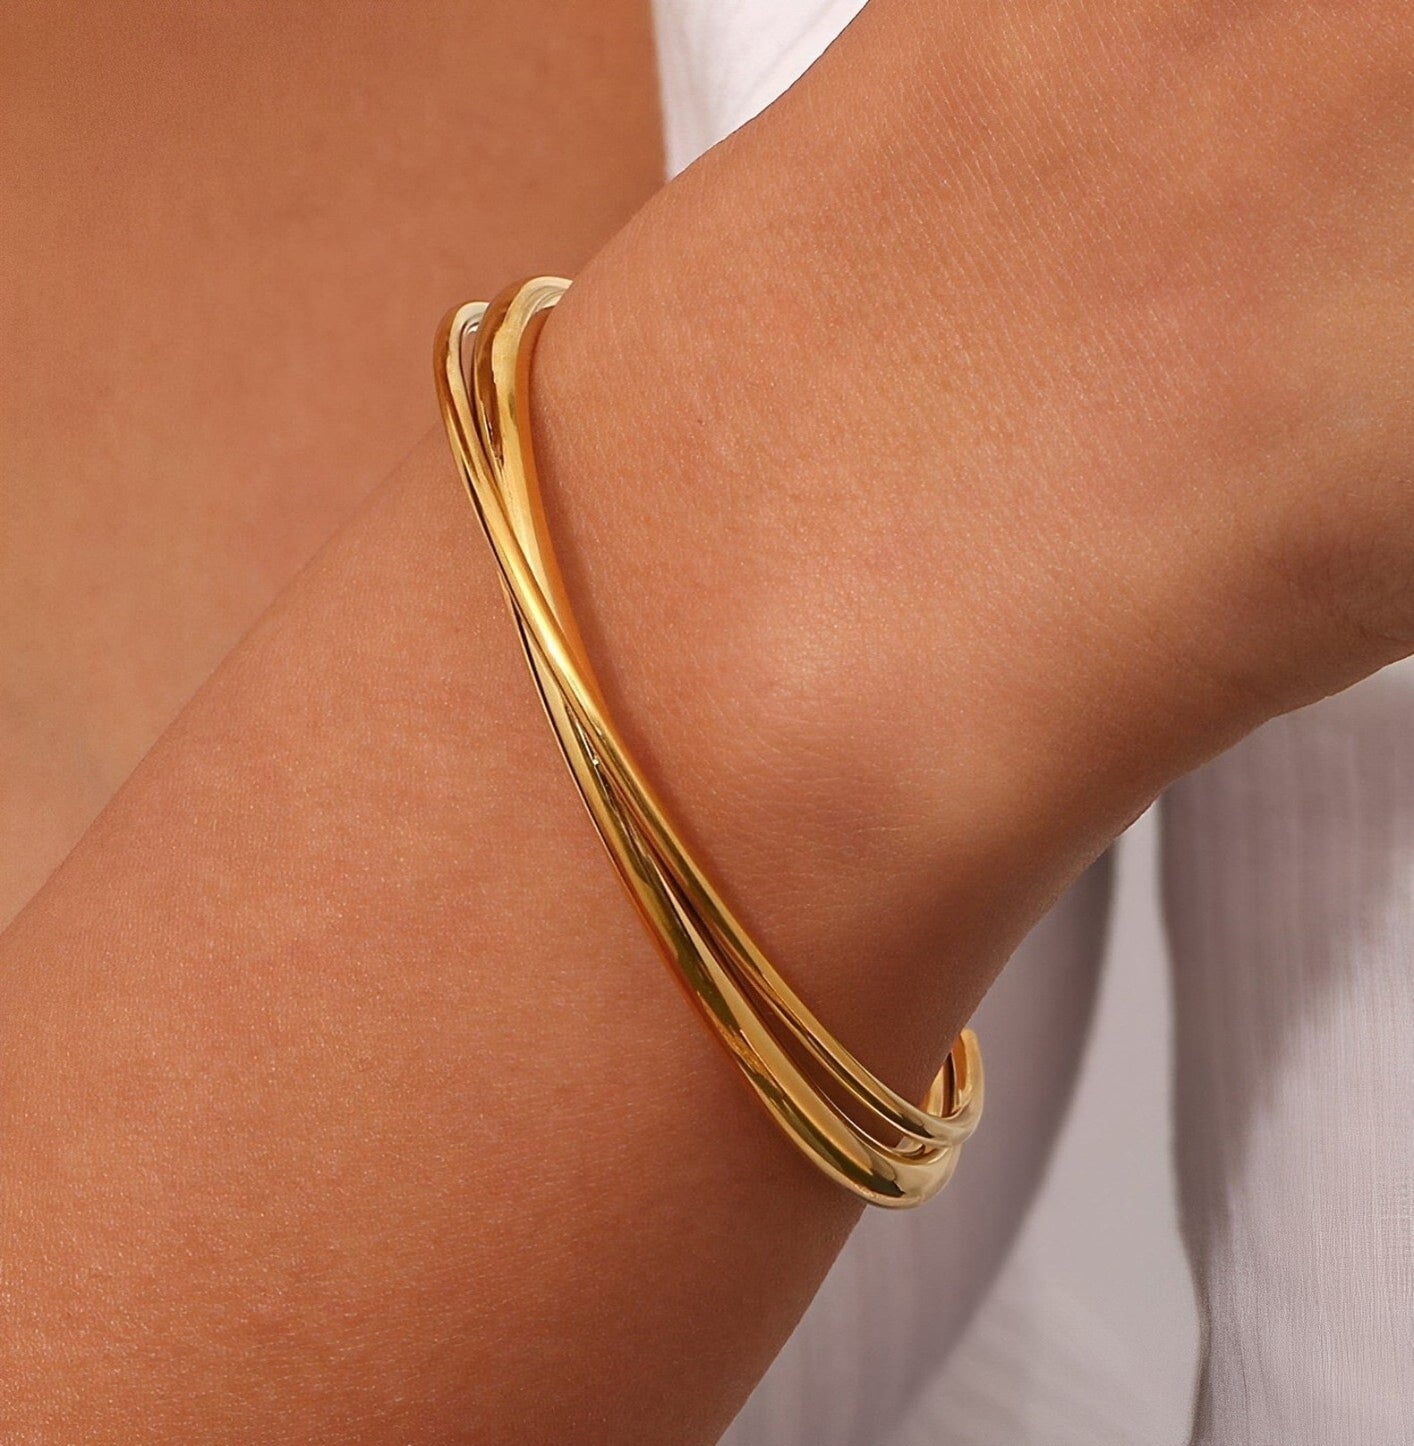 KNOT DOUBLE BRACELET braclet Yubama Jewelry Online Store - The Elegant Designs of Gold and Silver ! 